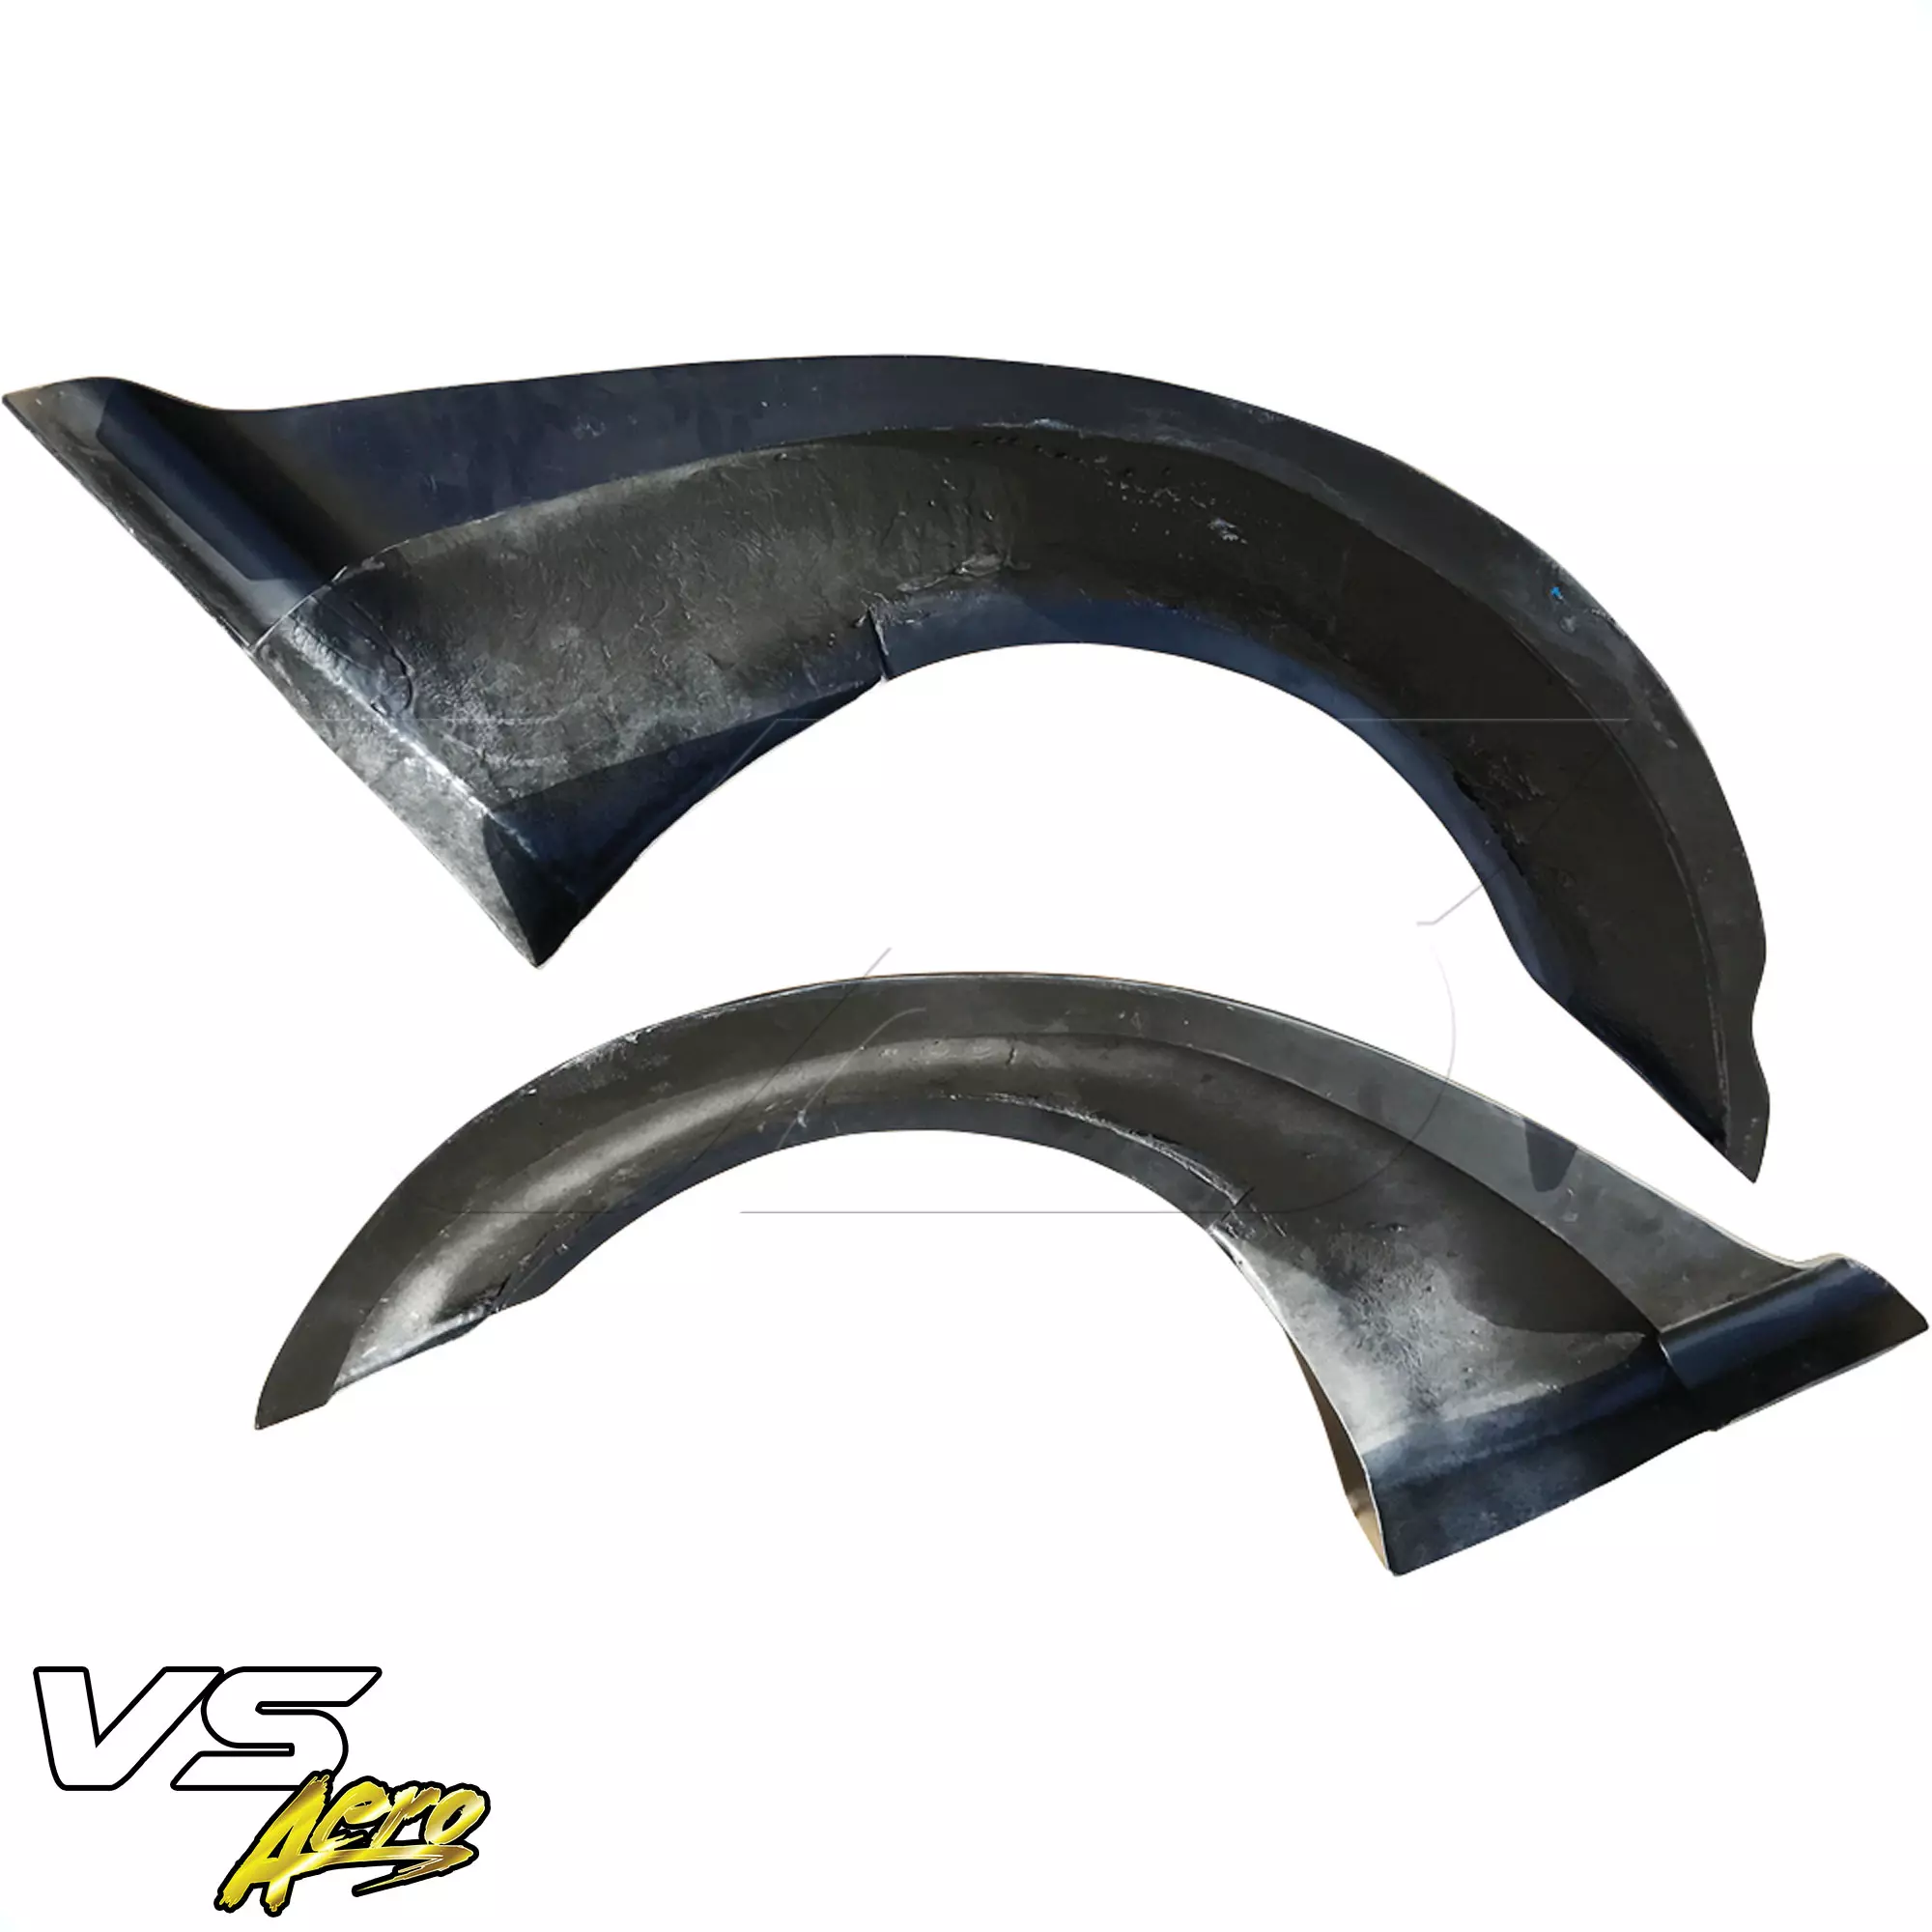 VSaero FRP LBPE Wide Body Fender Flares (rear) 4pc > Infiniti G37 Coupe 2008-2015 > 2dr Coupe - Image 21